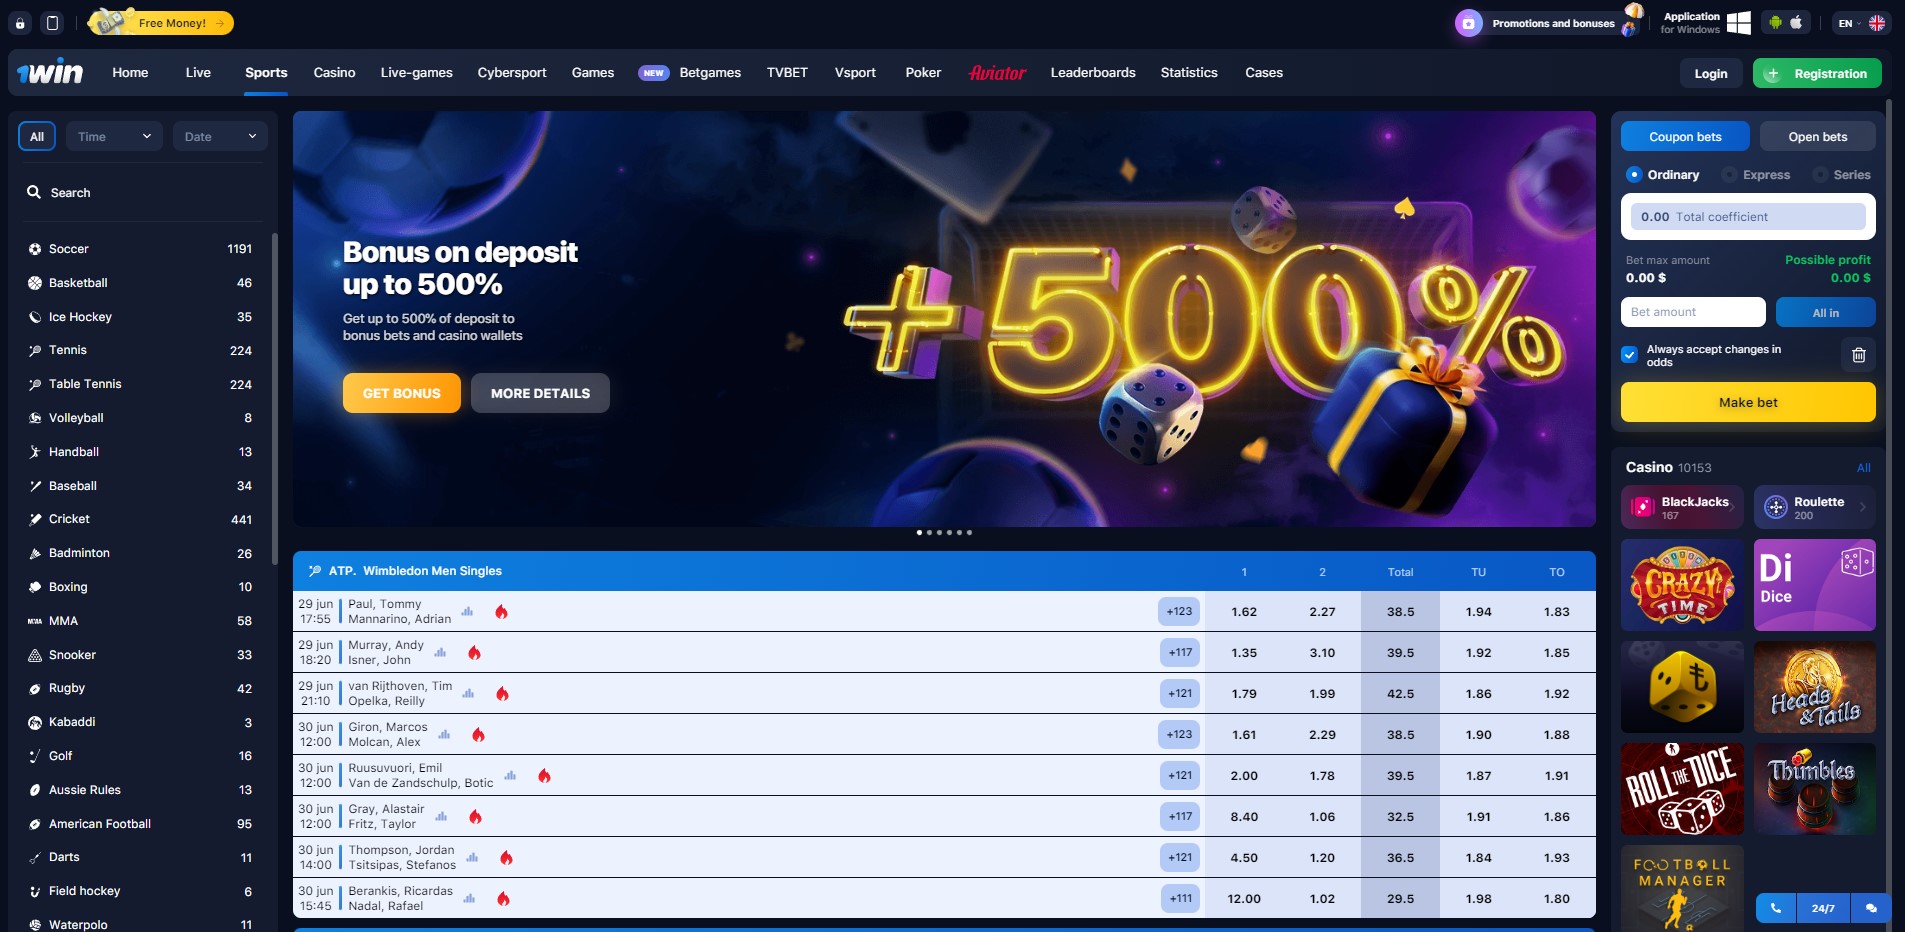 1win Main Page - Image of the 1win betting website's homepage, illustrating its layout and services tailored for Indian bettors in 2023.